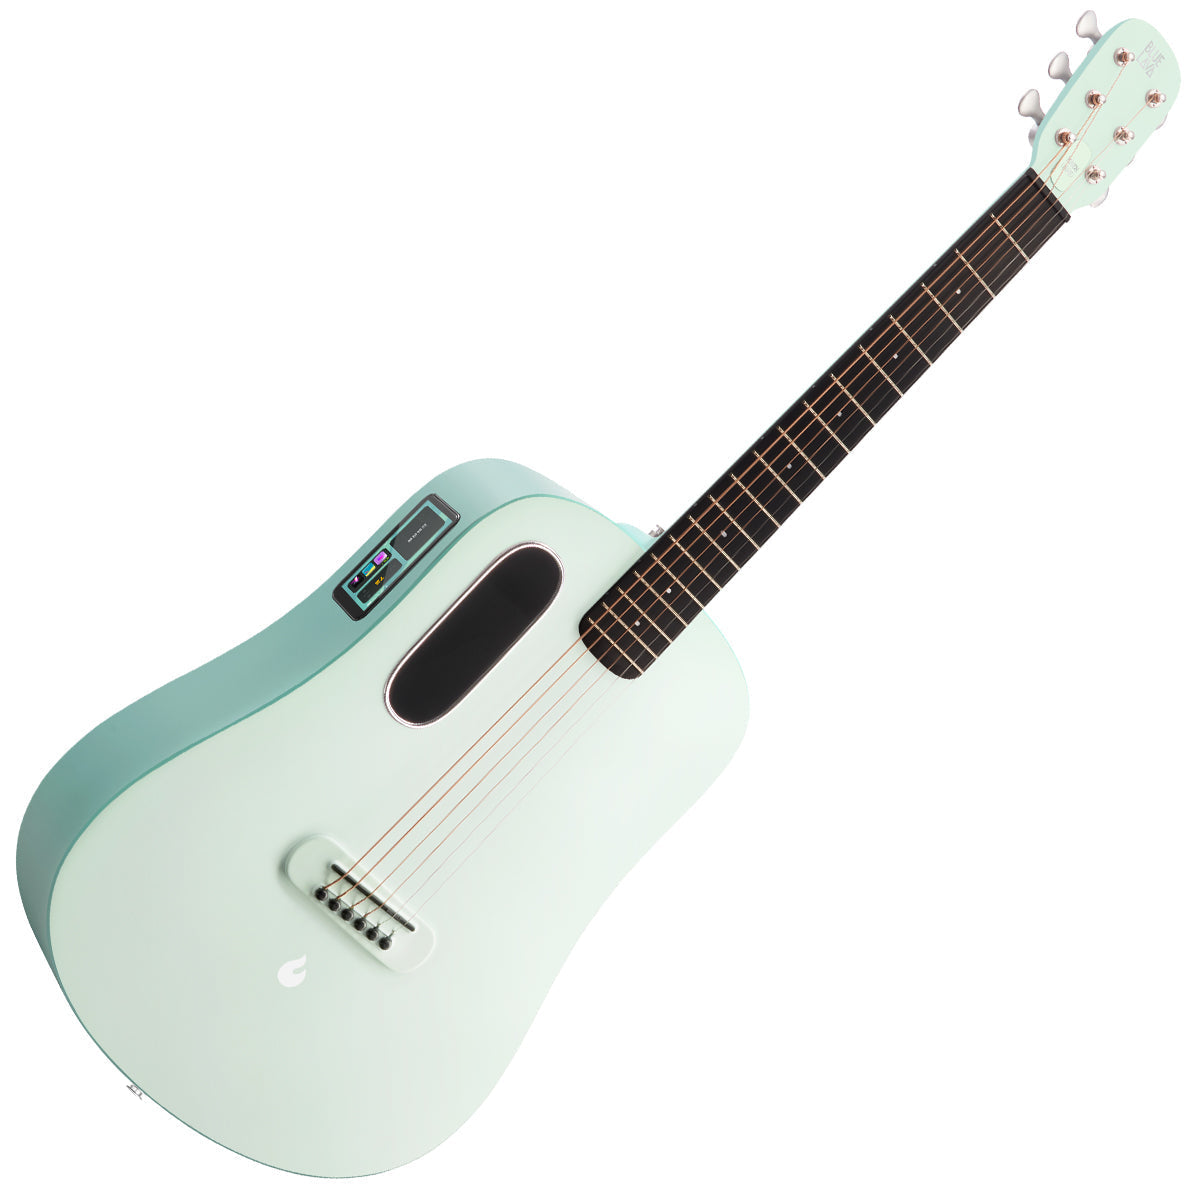 BLUE LAVA TOUCH with Airflow Bag ~ Aqua Green / Mint Green-Richards Guitars Of Stratford Upon Avon